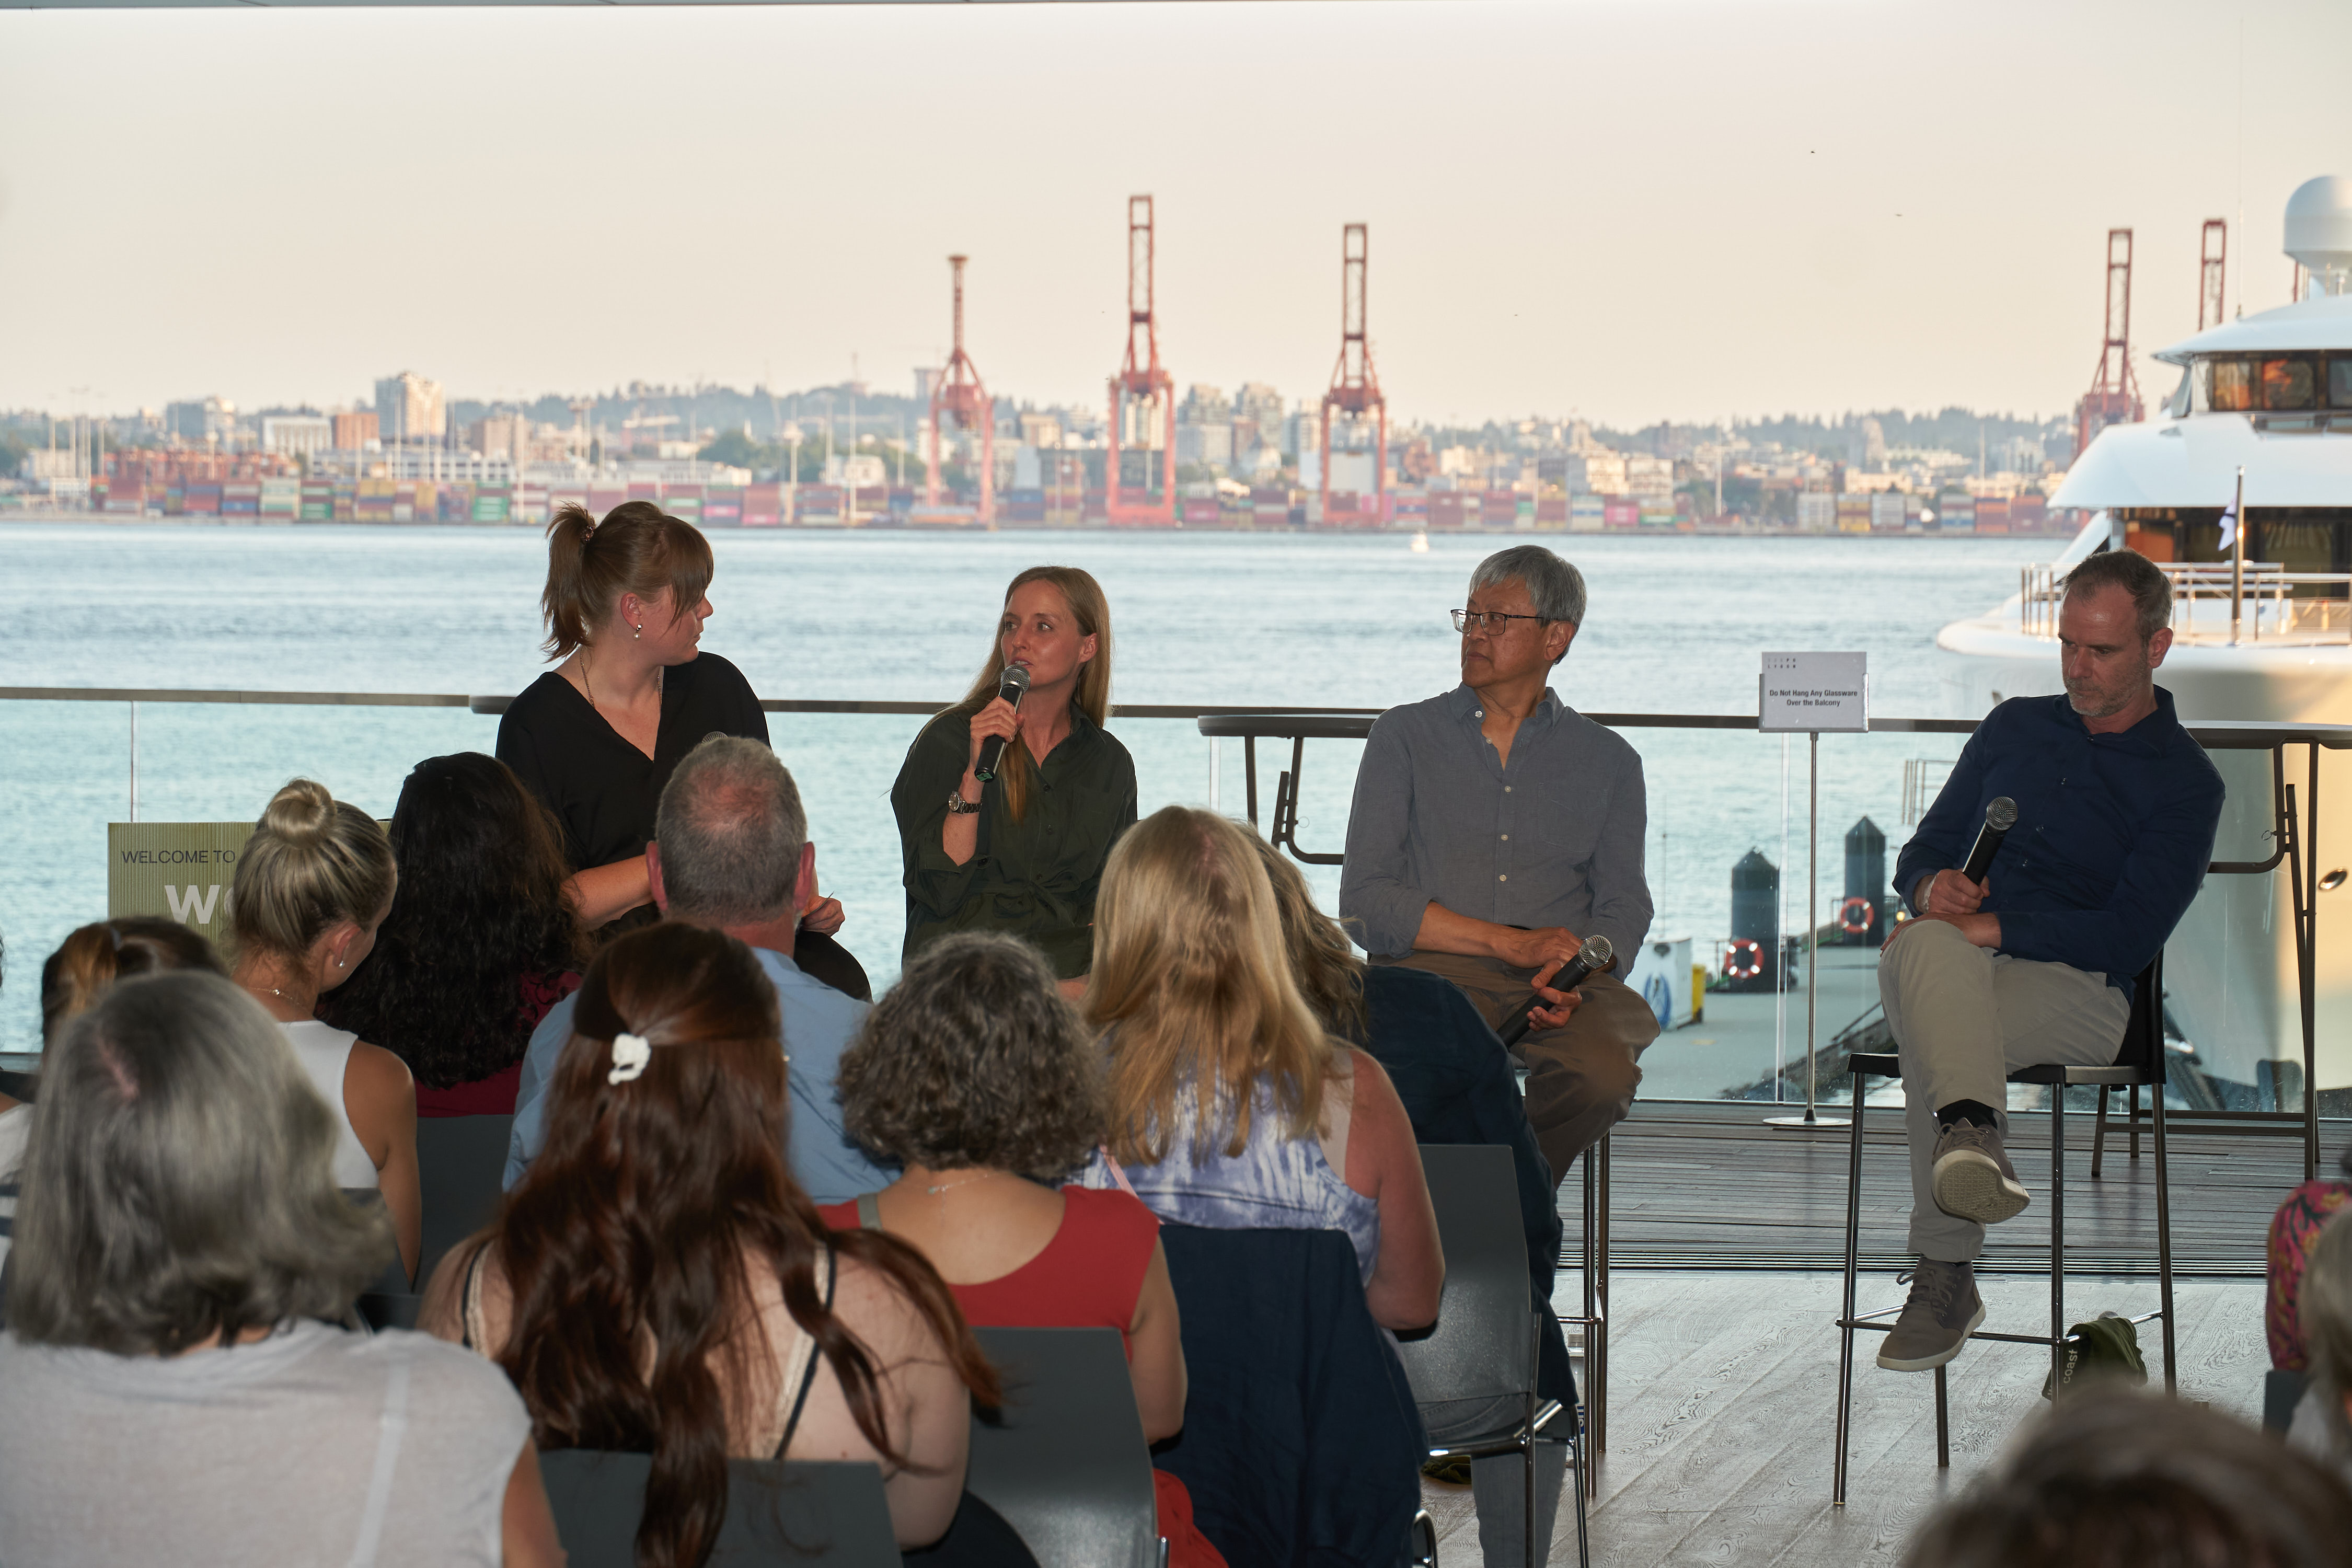 An audience listening to a panel of speakers at an outdoor event overlooking the harbour.